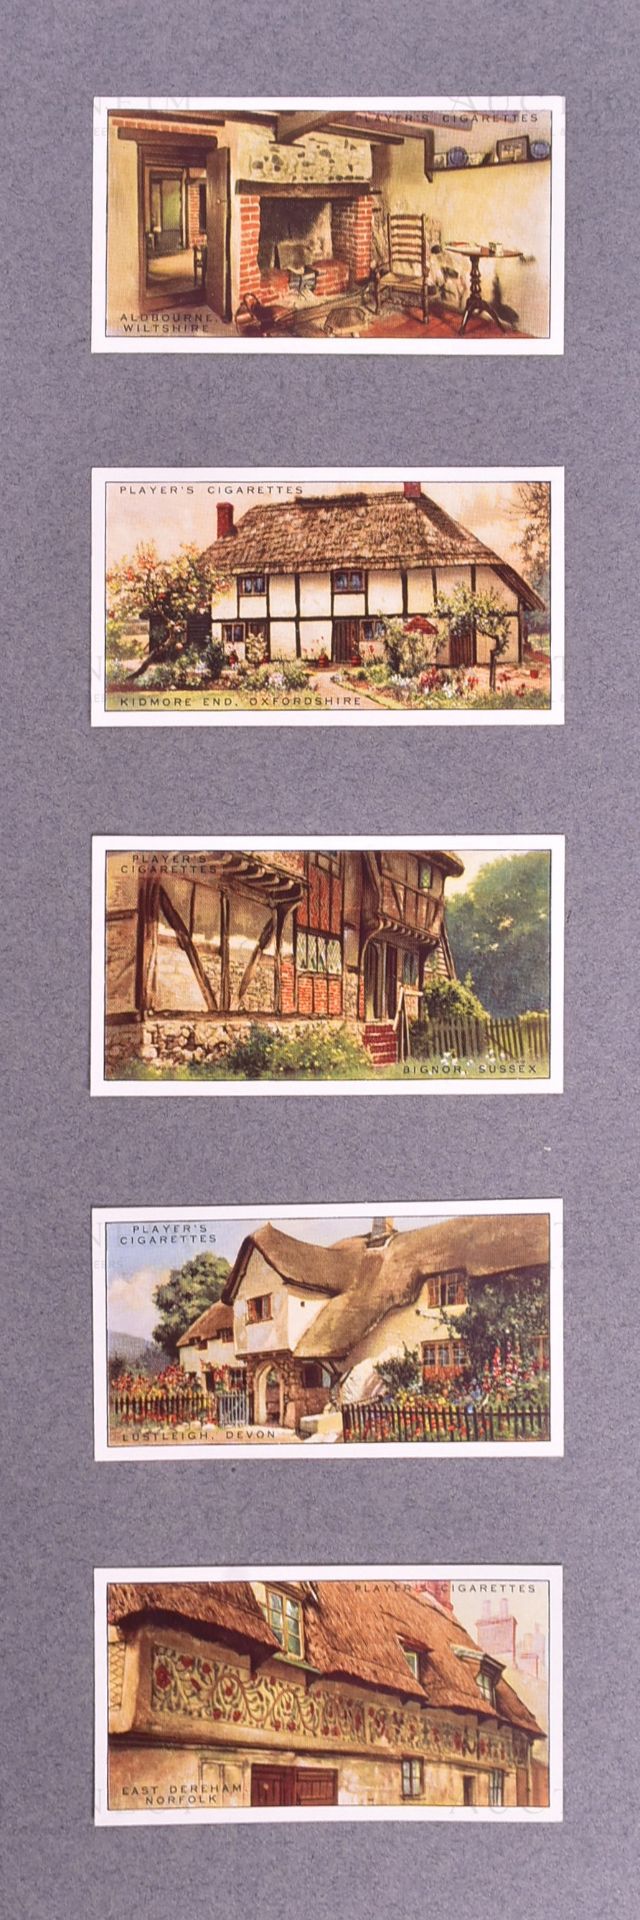 PLAYER'S - COTTAGE ARCHITECTURE (1946) - ORIGINAL PRINTER PROOFS - Image 3 of 7